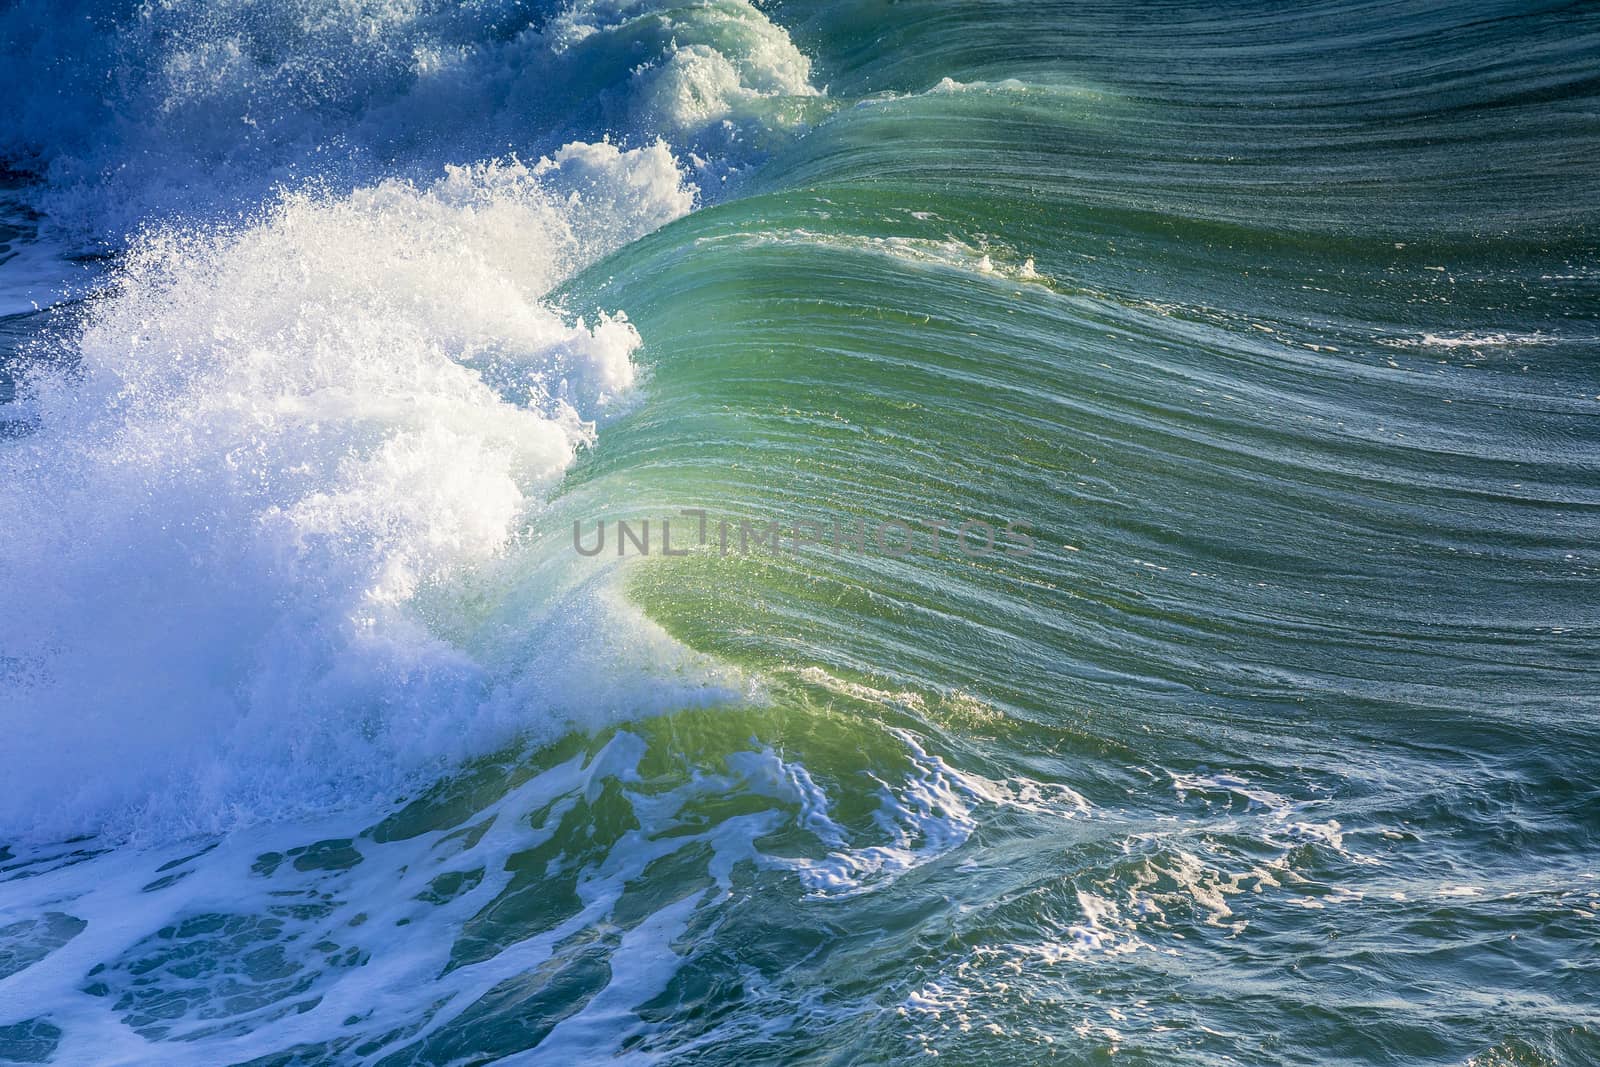 Ocean wave by truphoto